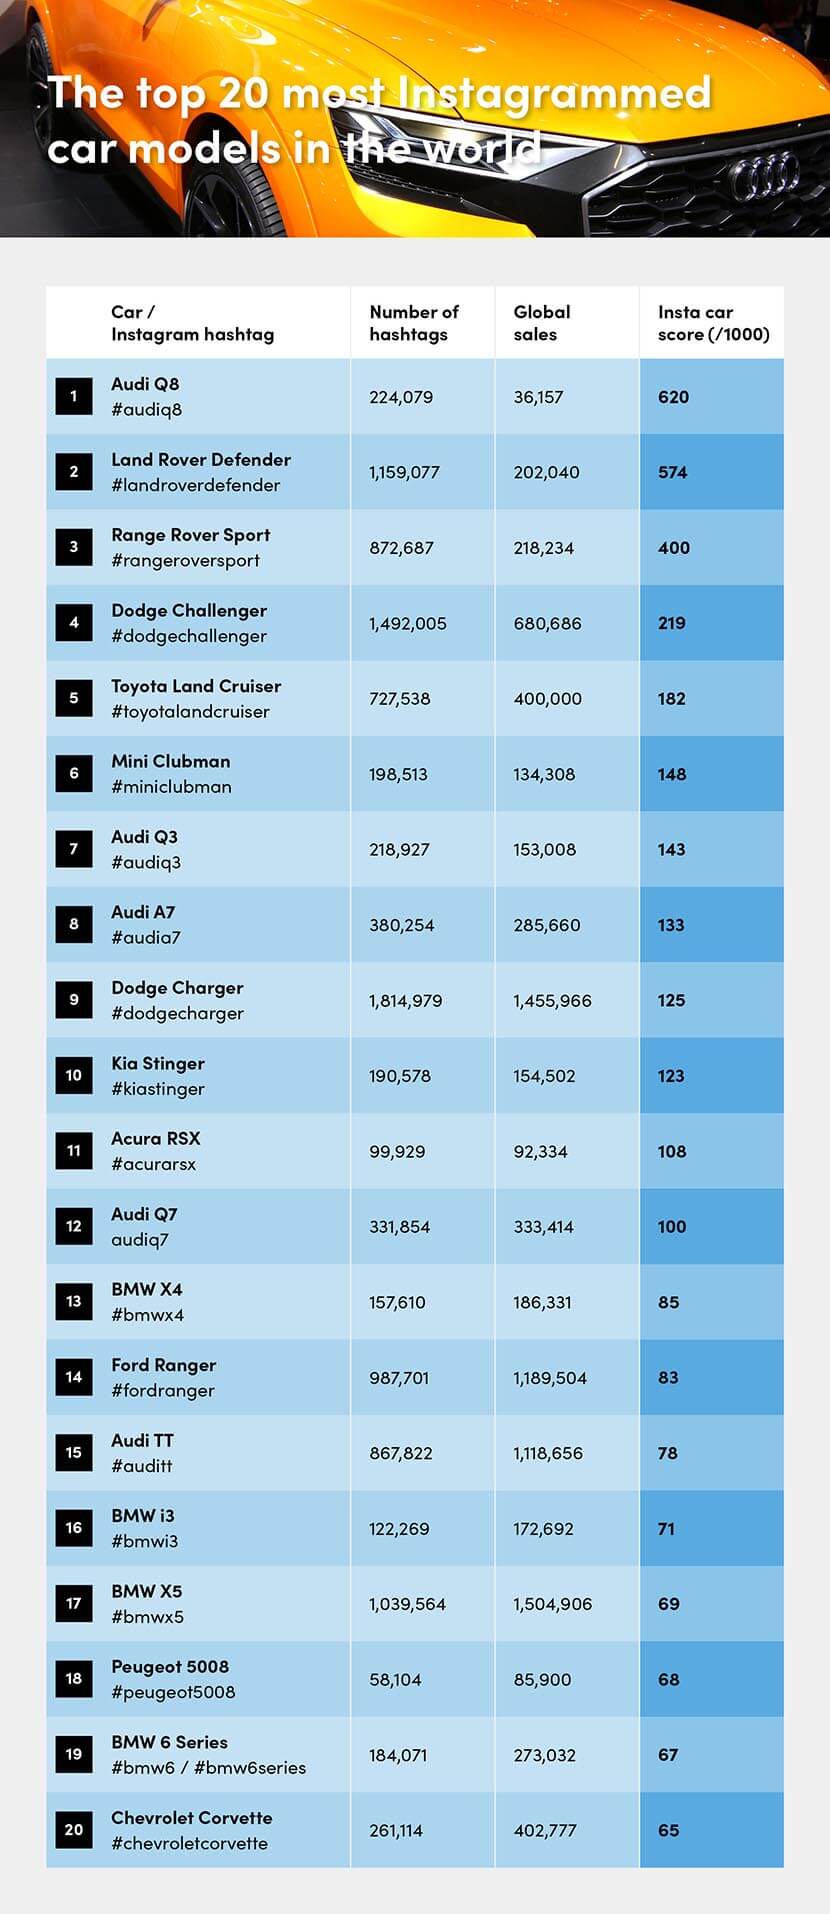 Table showing the top 20 most Instagrammed car models in the world